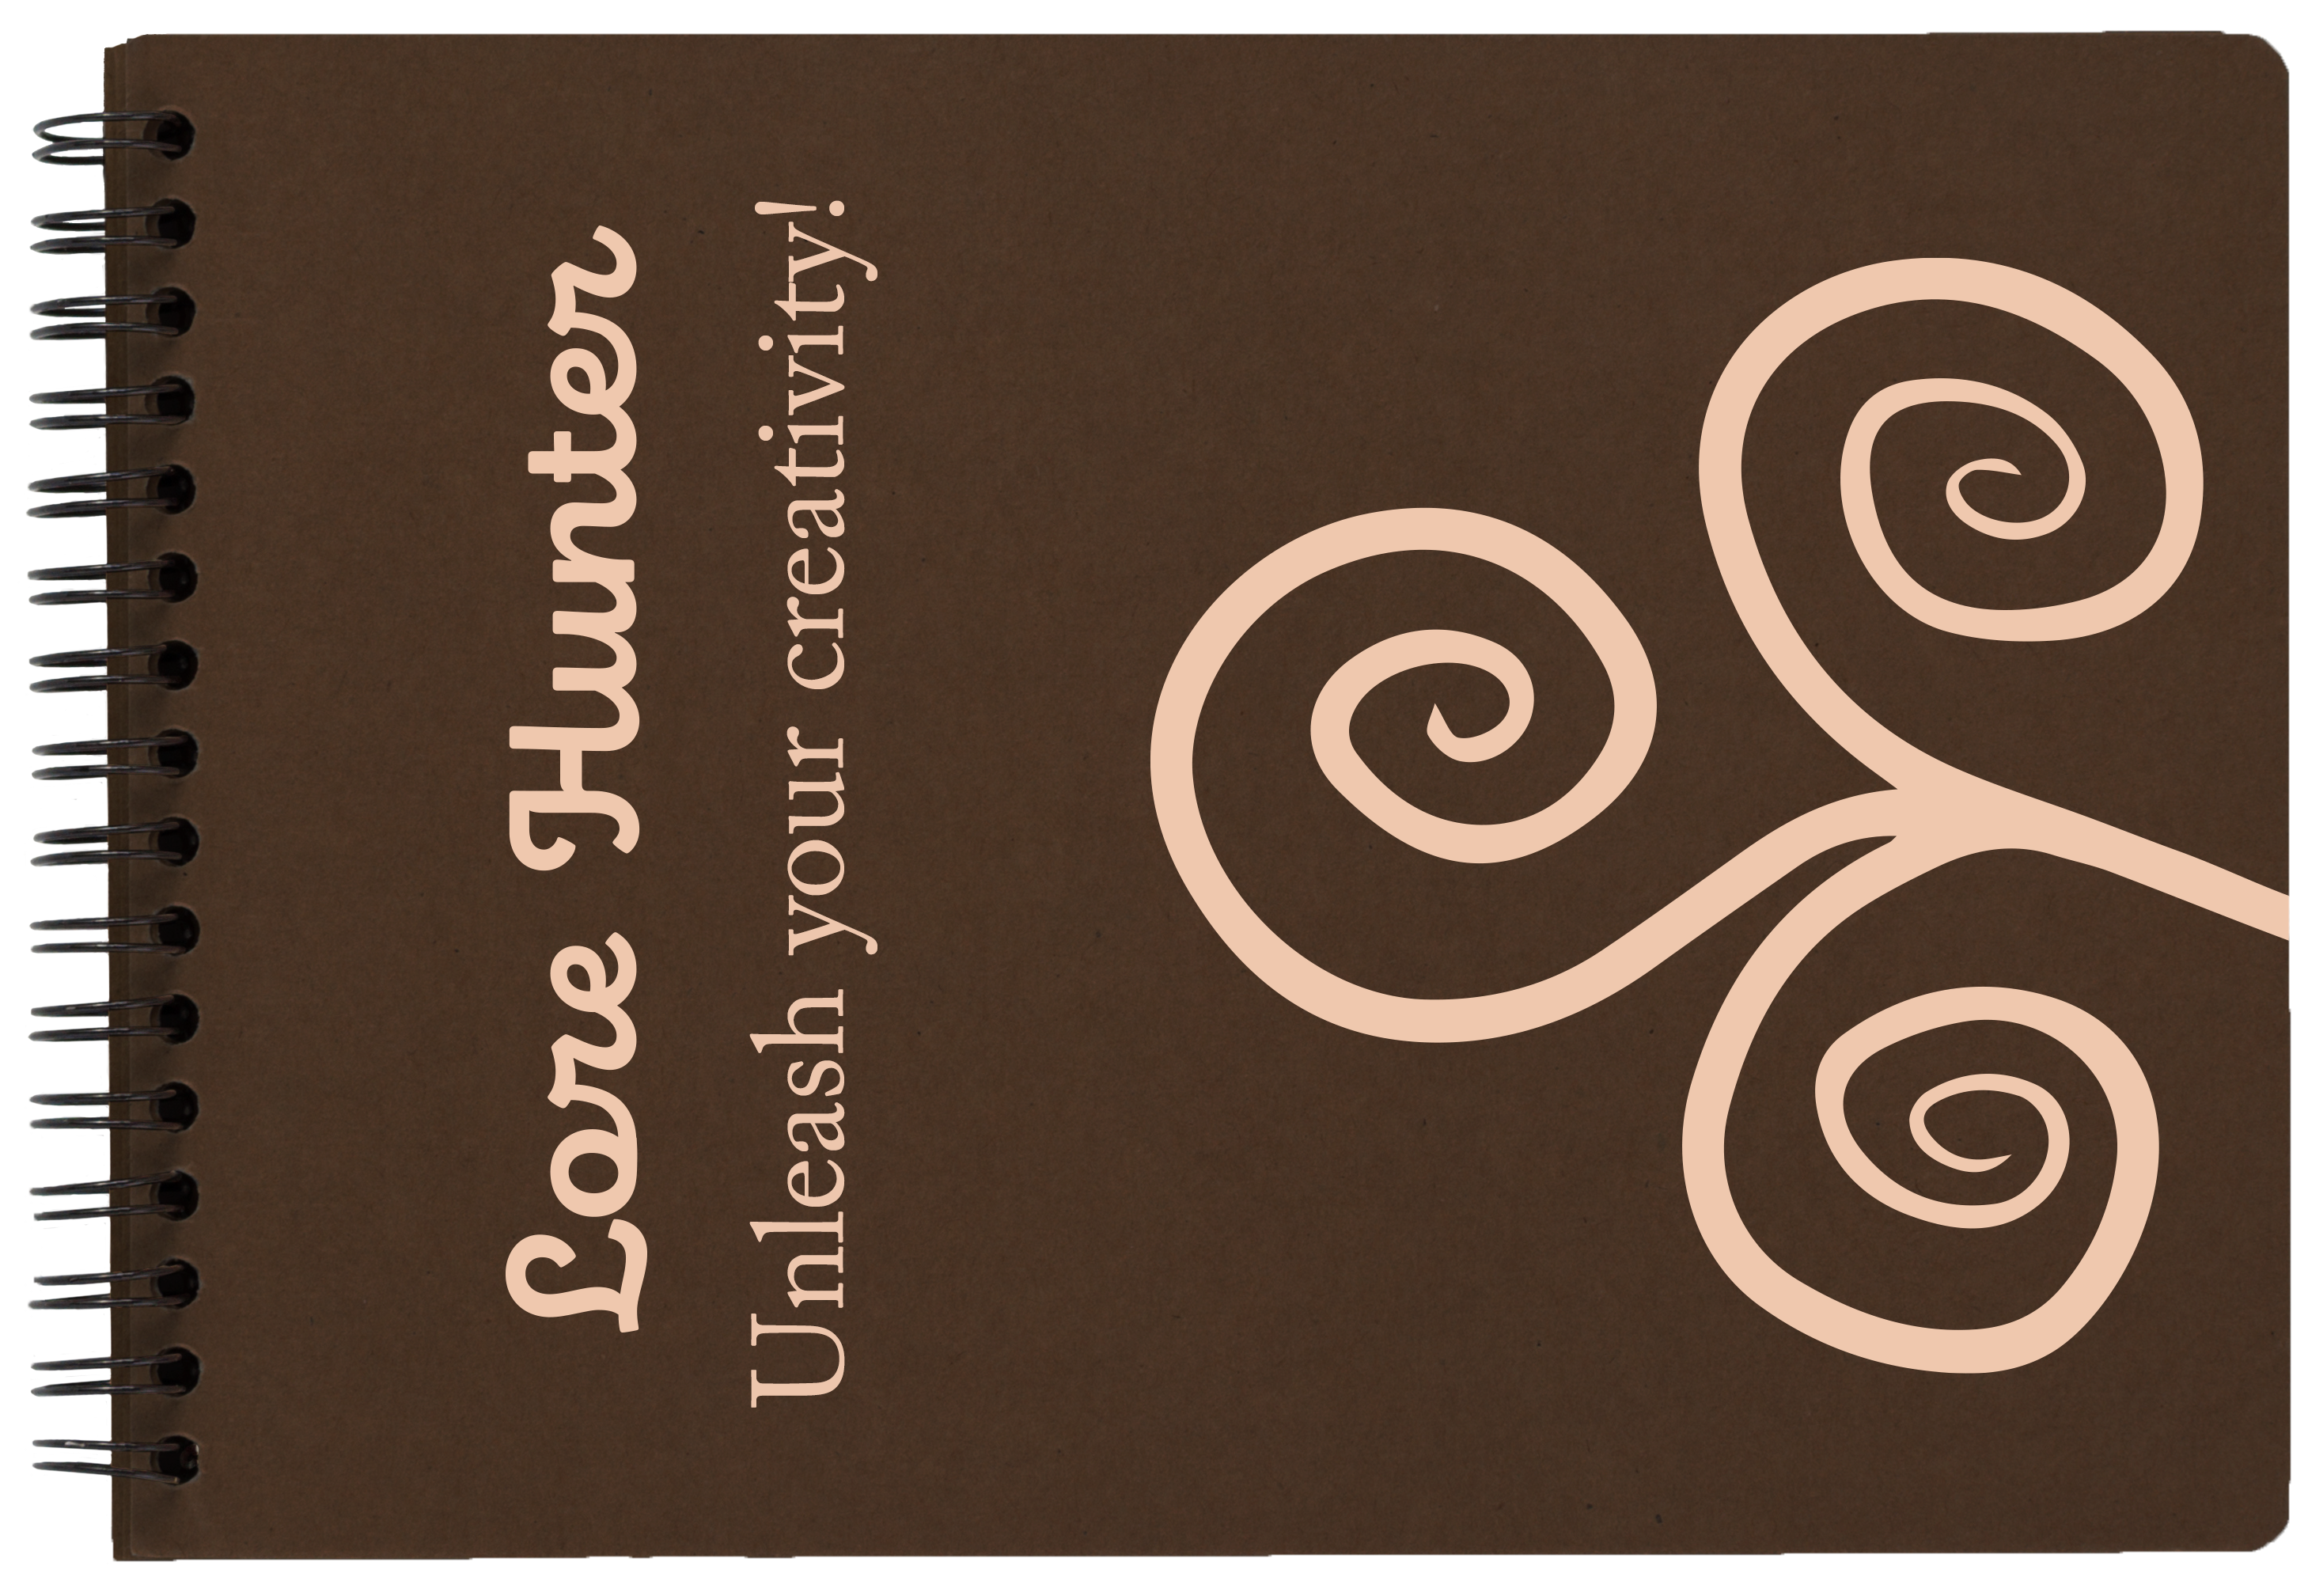 This is a mockup image of a dark brown 
			notepad with a tan-colored pattern containing three spirals intertwined together.